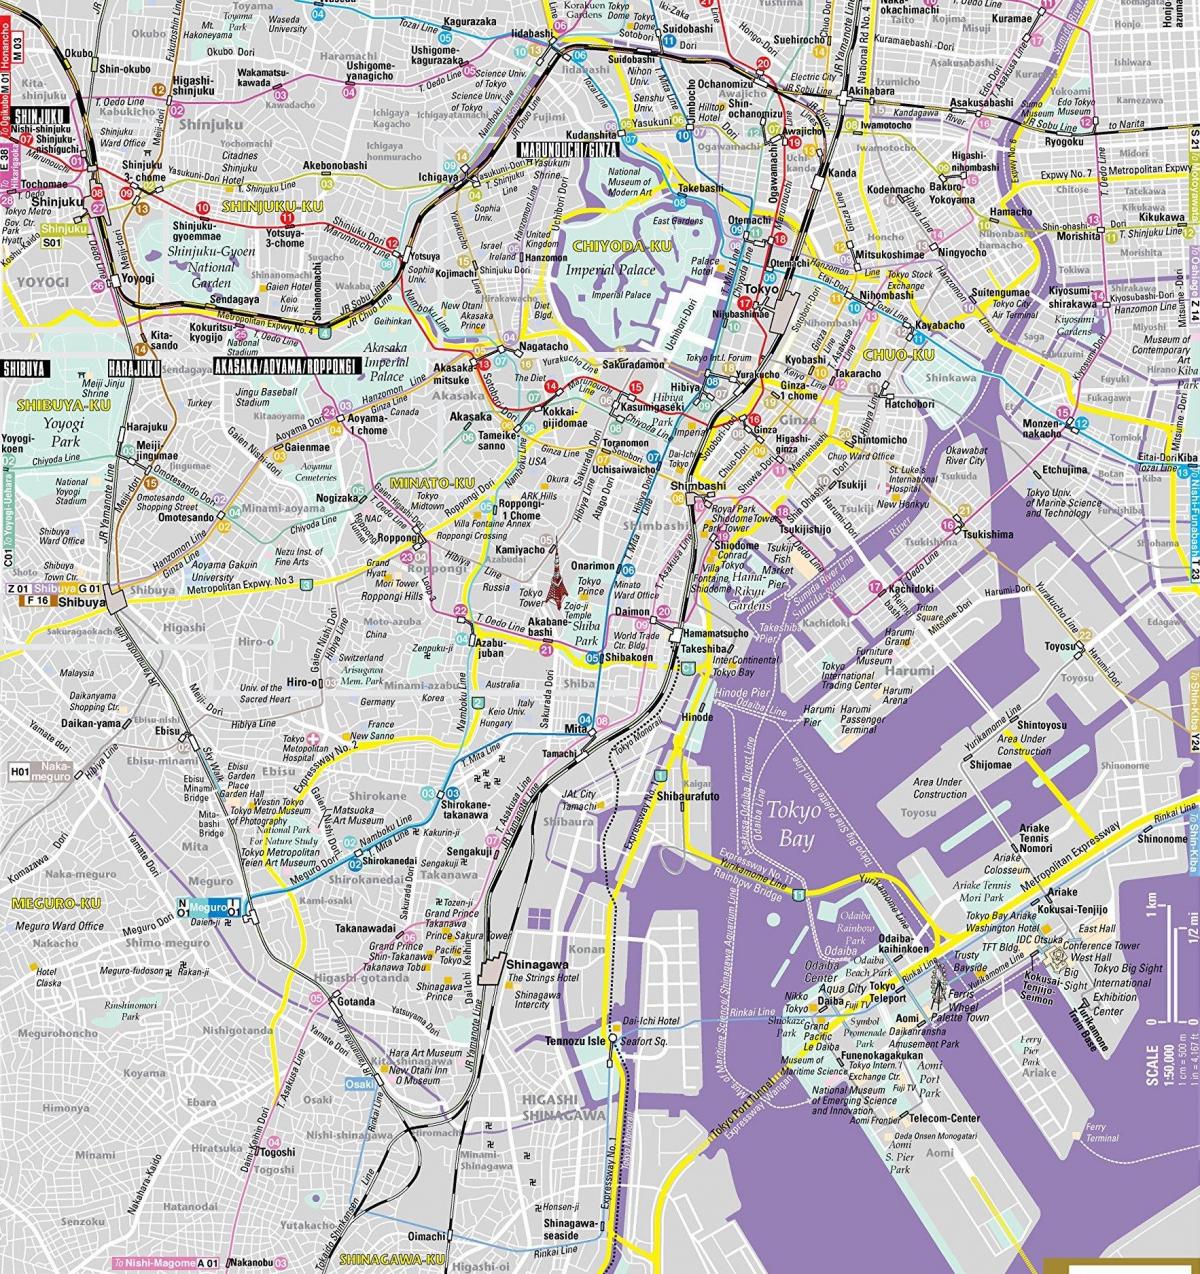 Tokyo in map